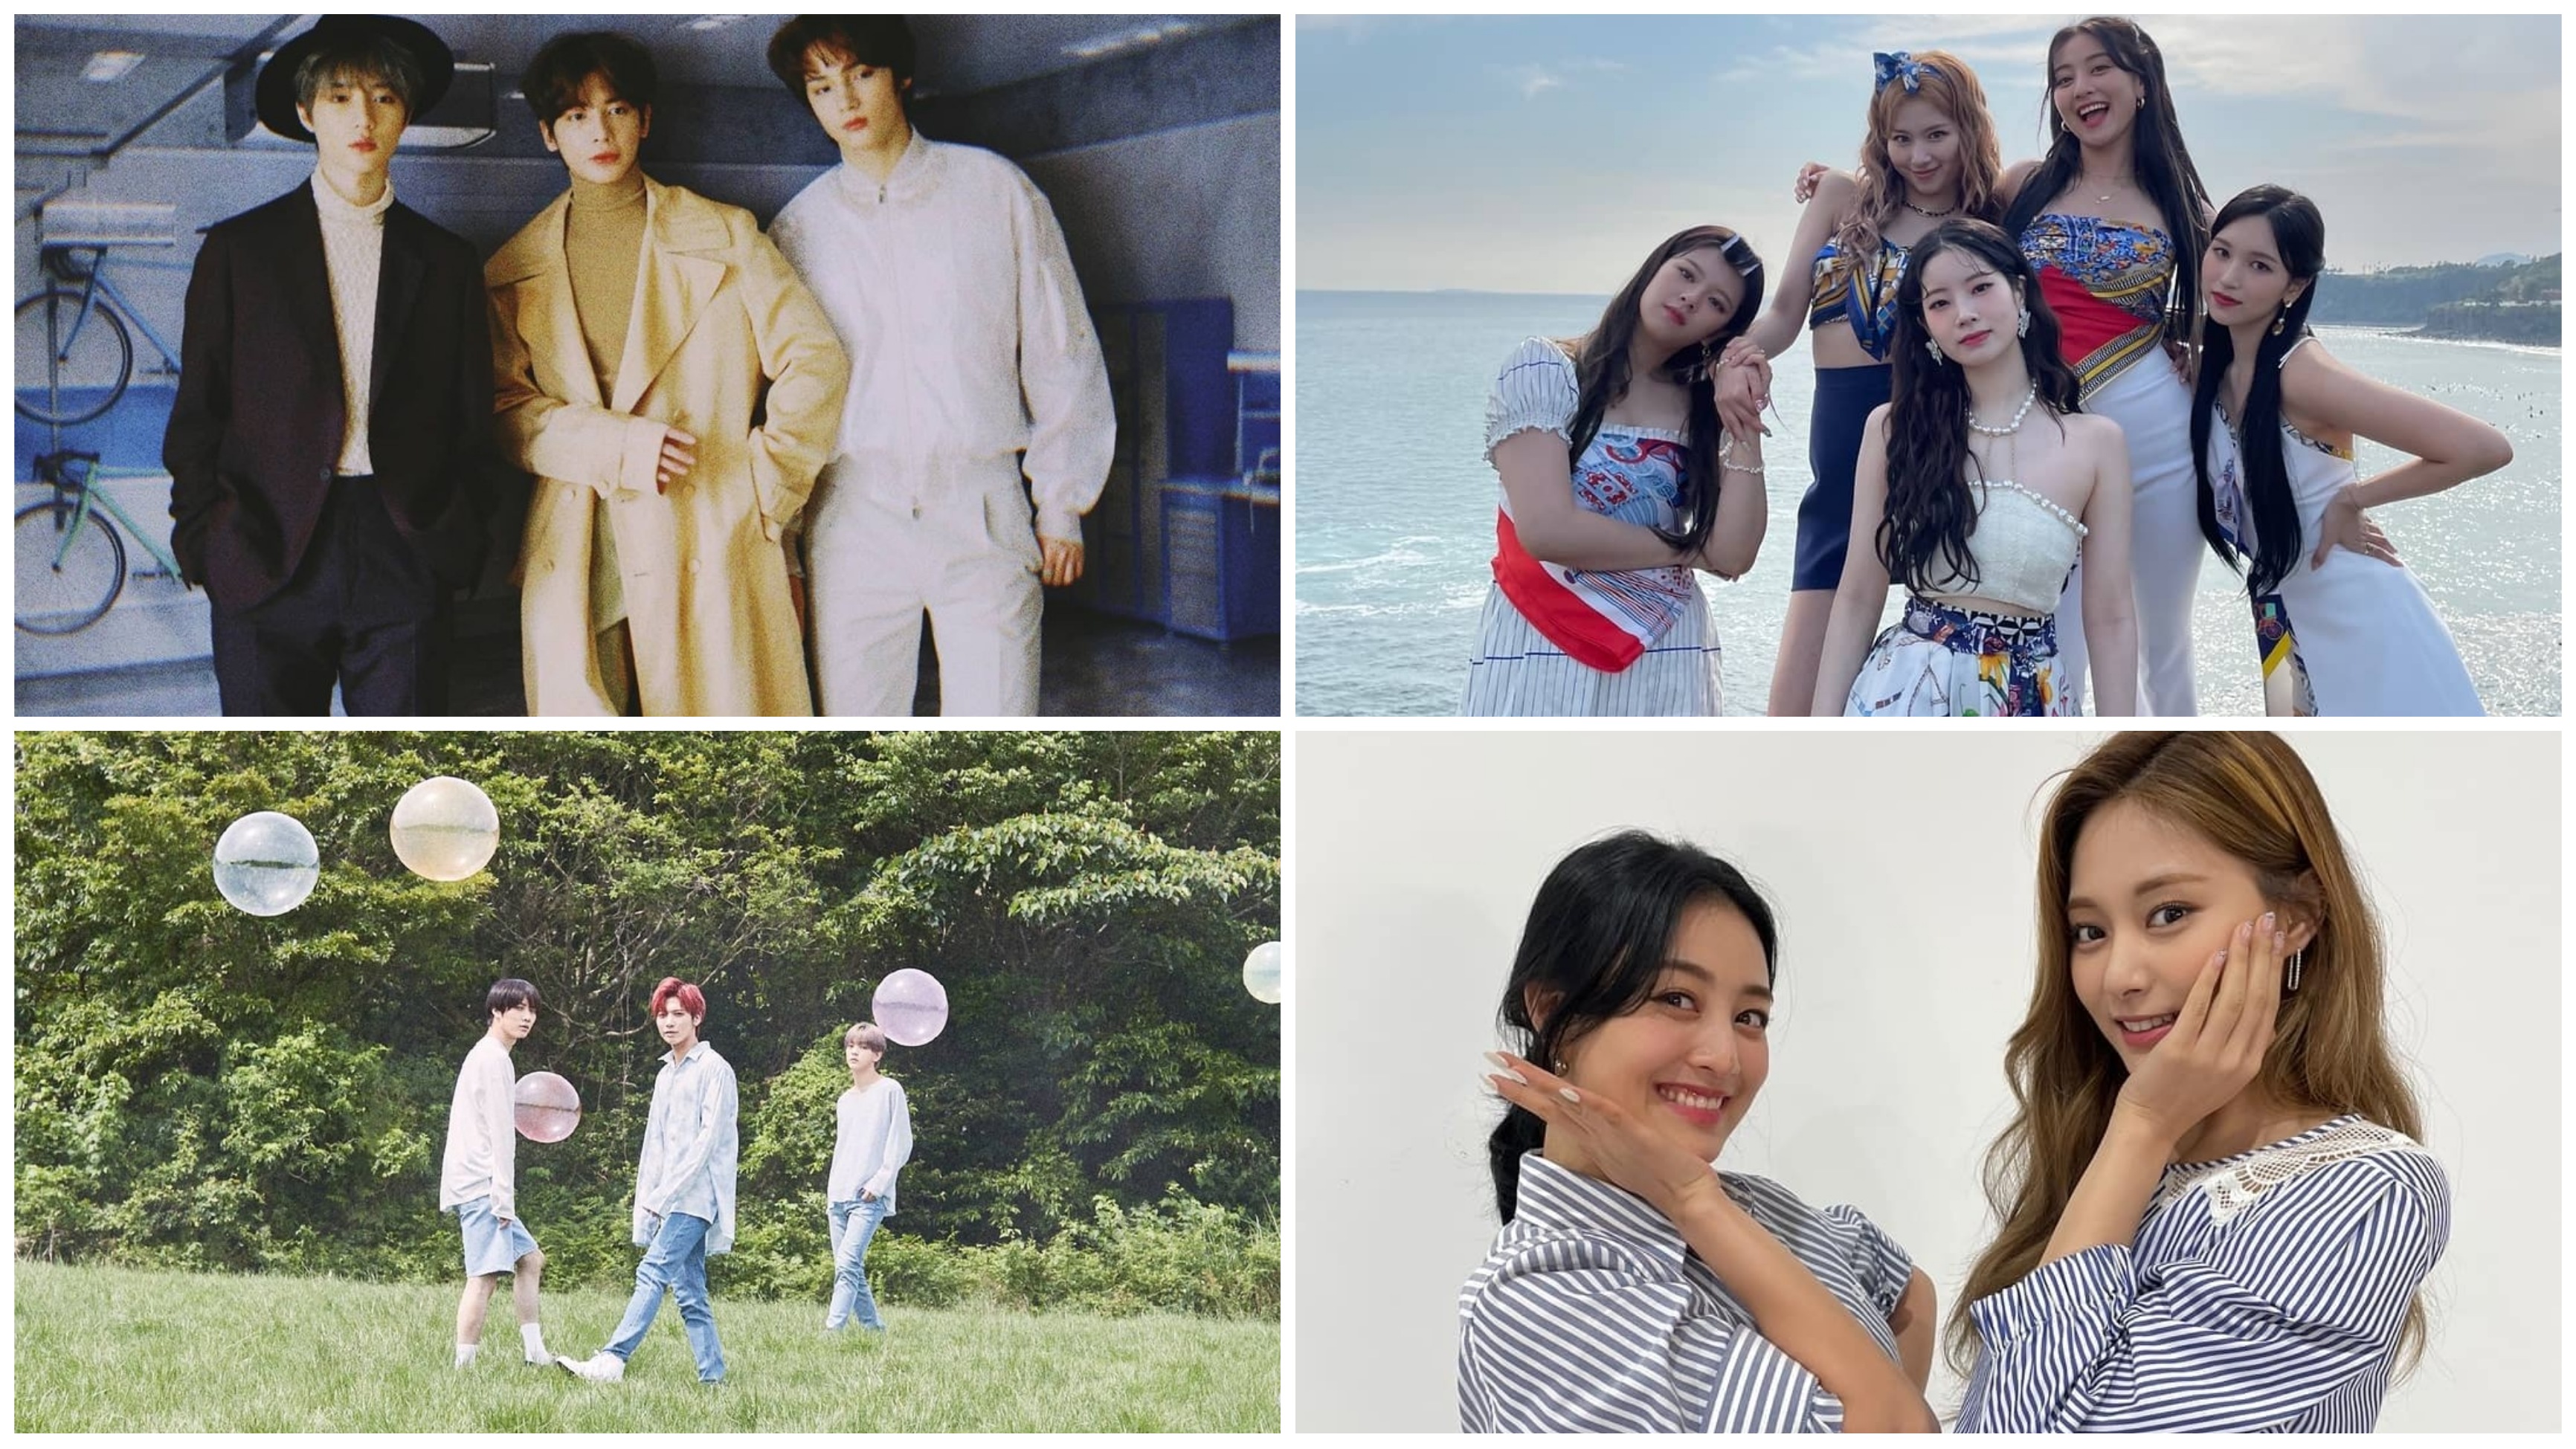 Take cues from Together X Twice for perfect elegant poses